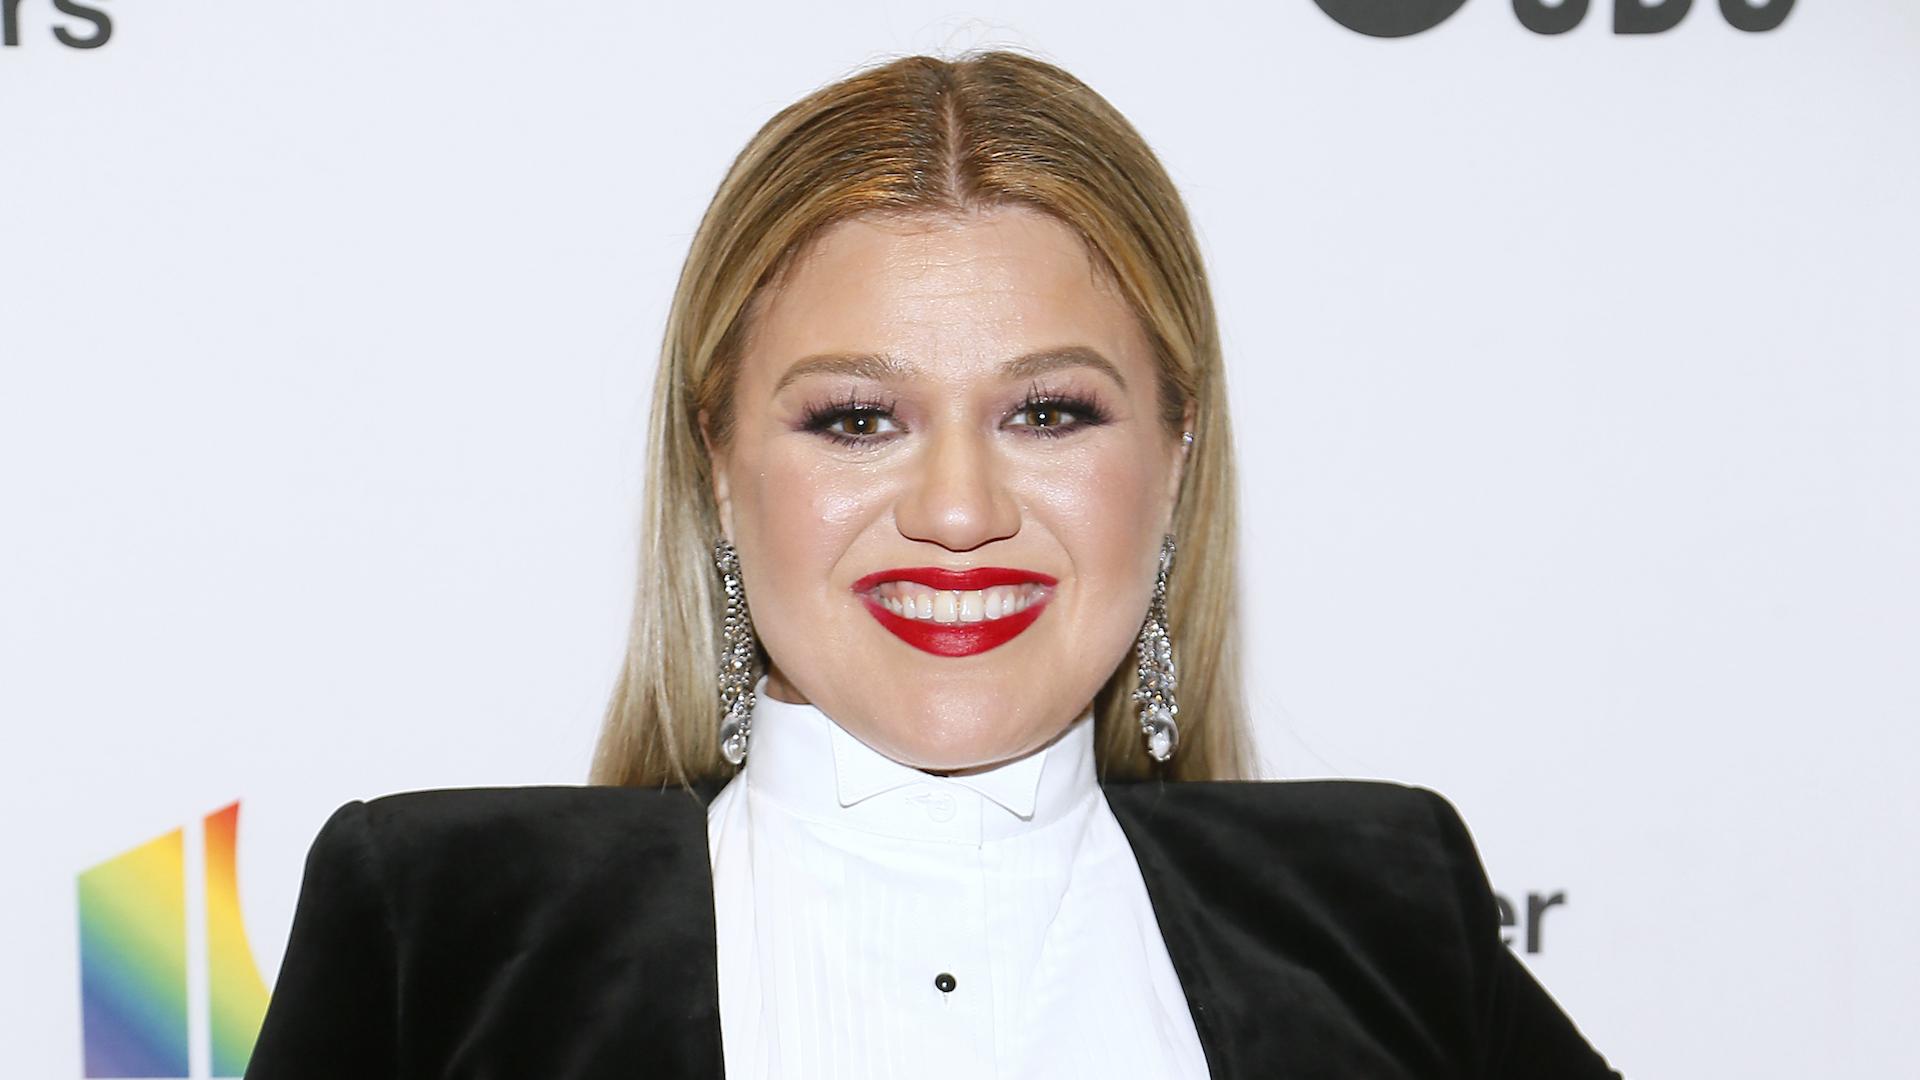 Here's What We Know About Kelly Clarkson's Talk Show So Far